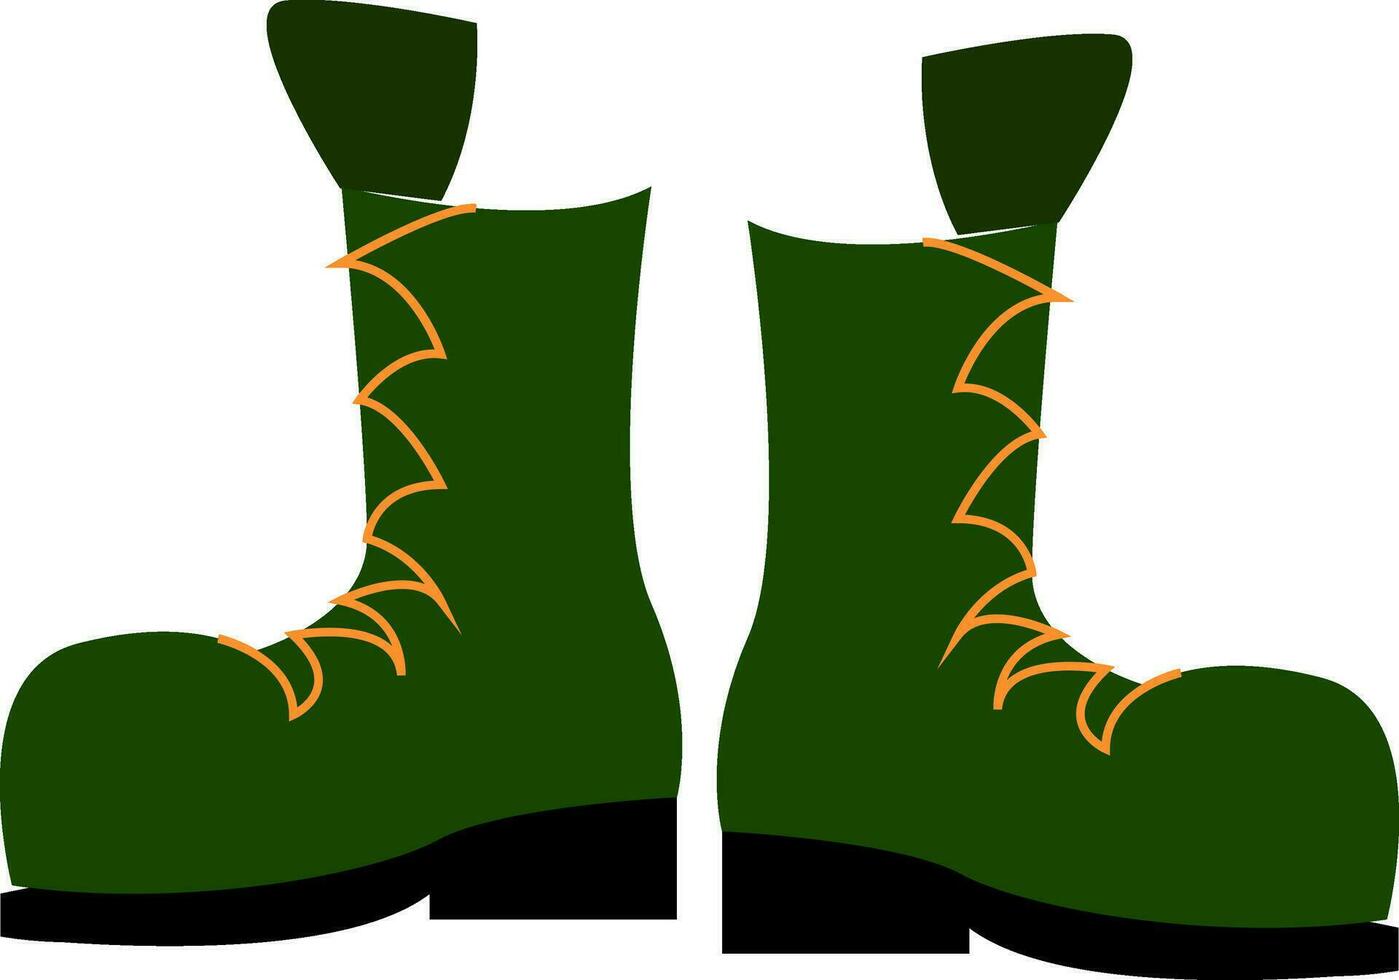 A green high ankle sturdy boot with laces used by soldiers vector color drawing or illustration